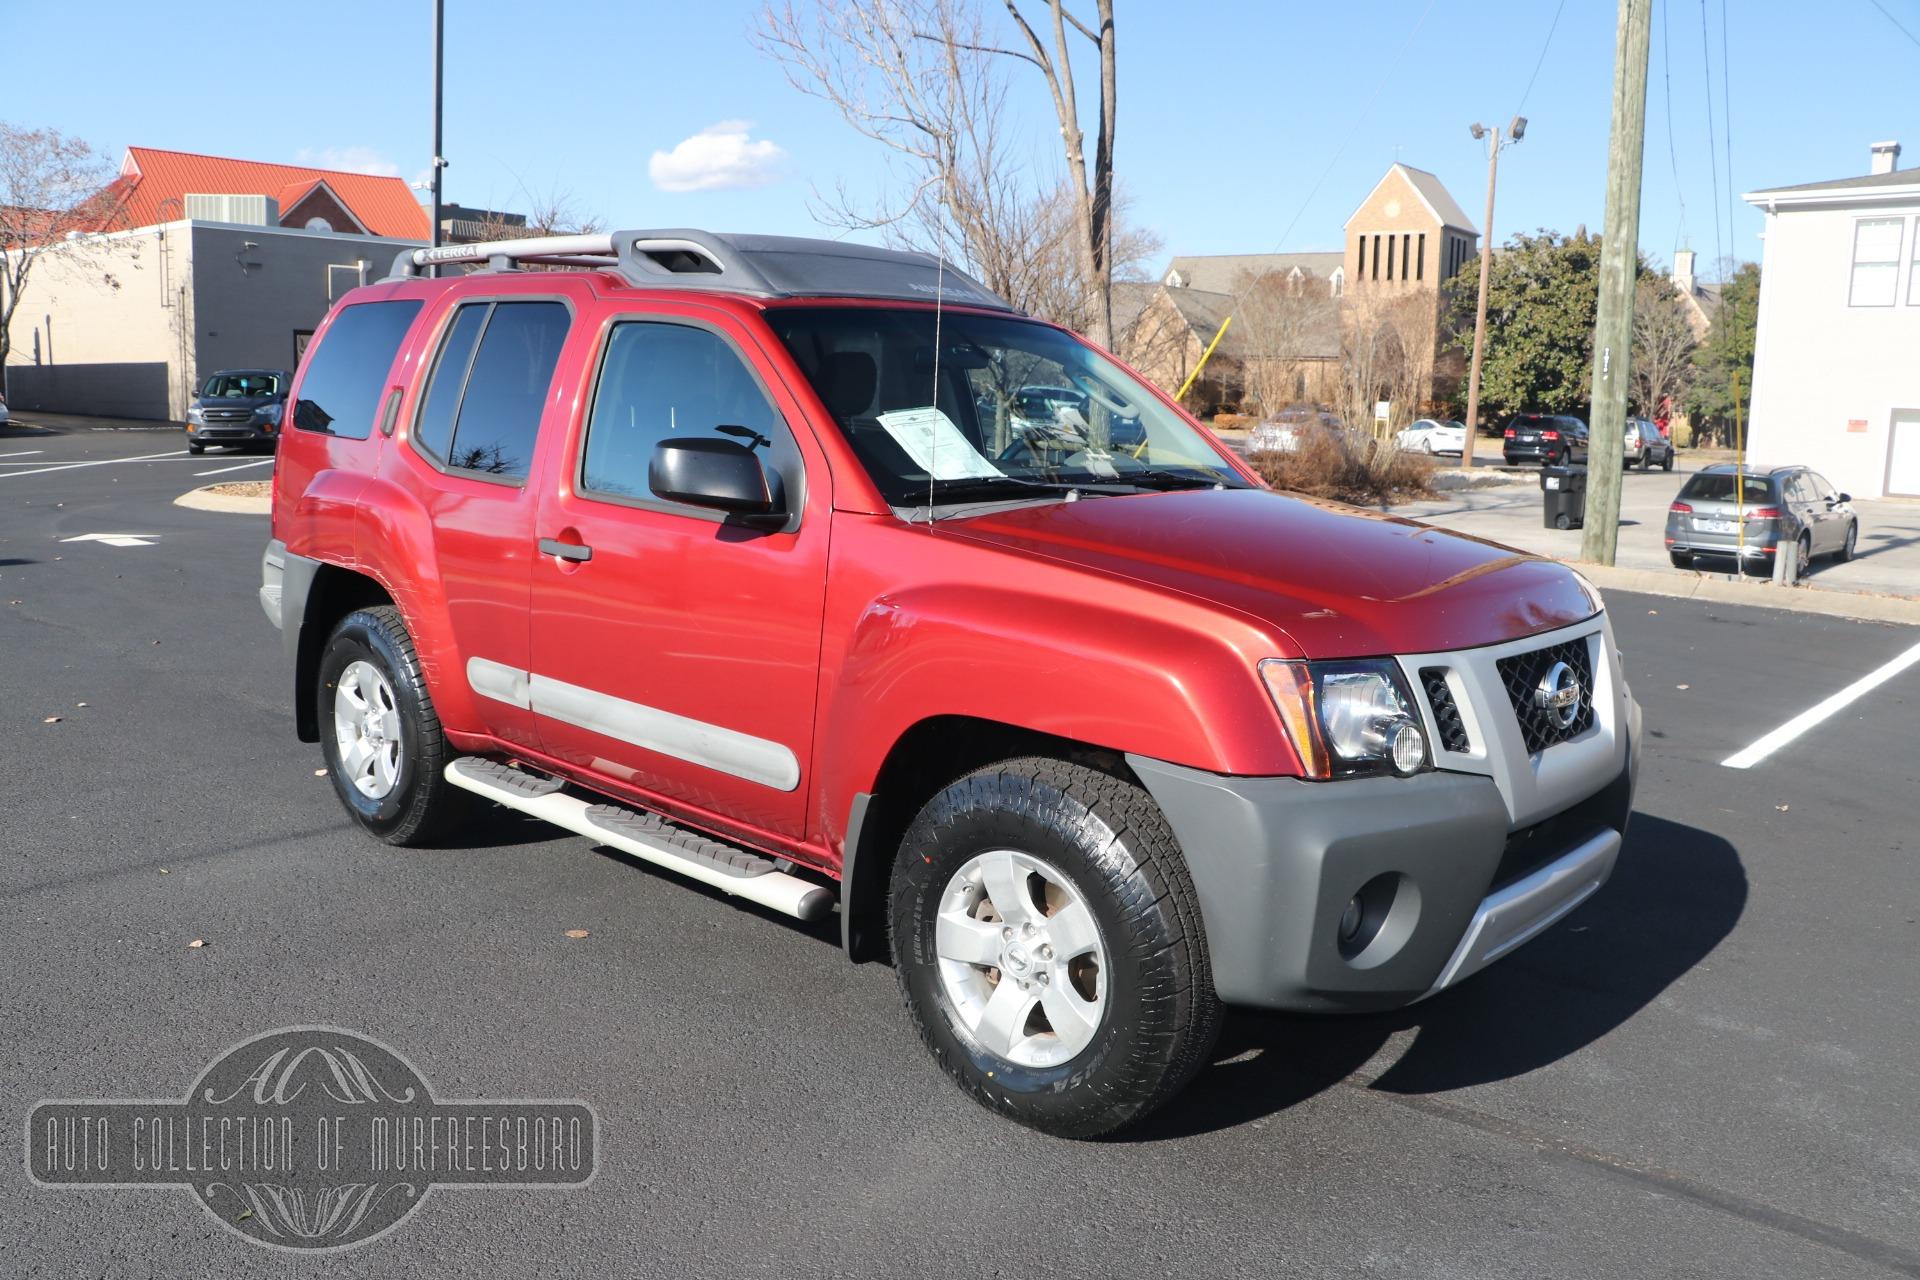 Used 2011 Nissan Xterra XTERRA S AUTO 4X4 VALUE PACK for sale $10,500 at Auto Collection in Murfreesboro TN 37129 1